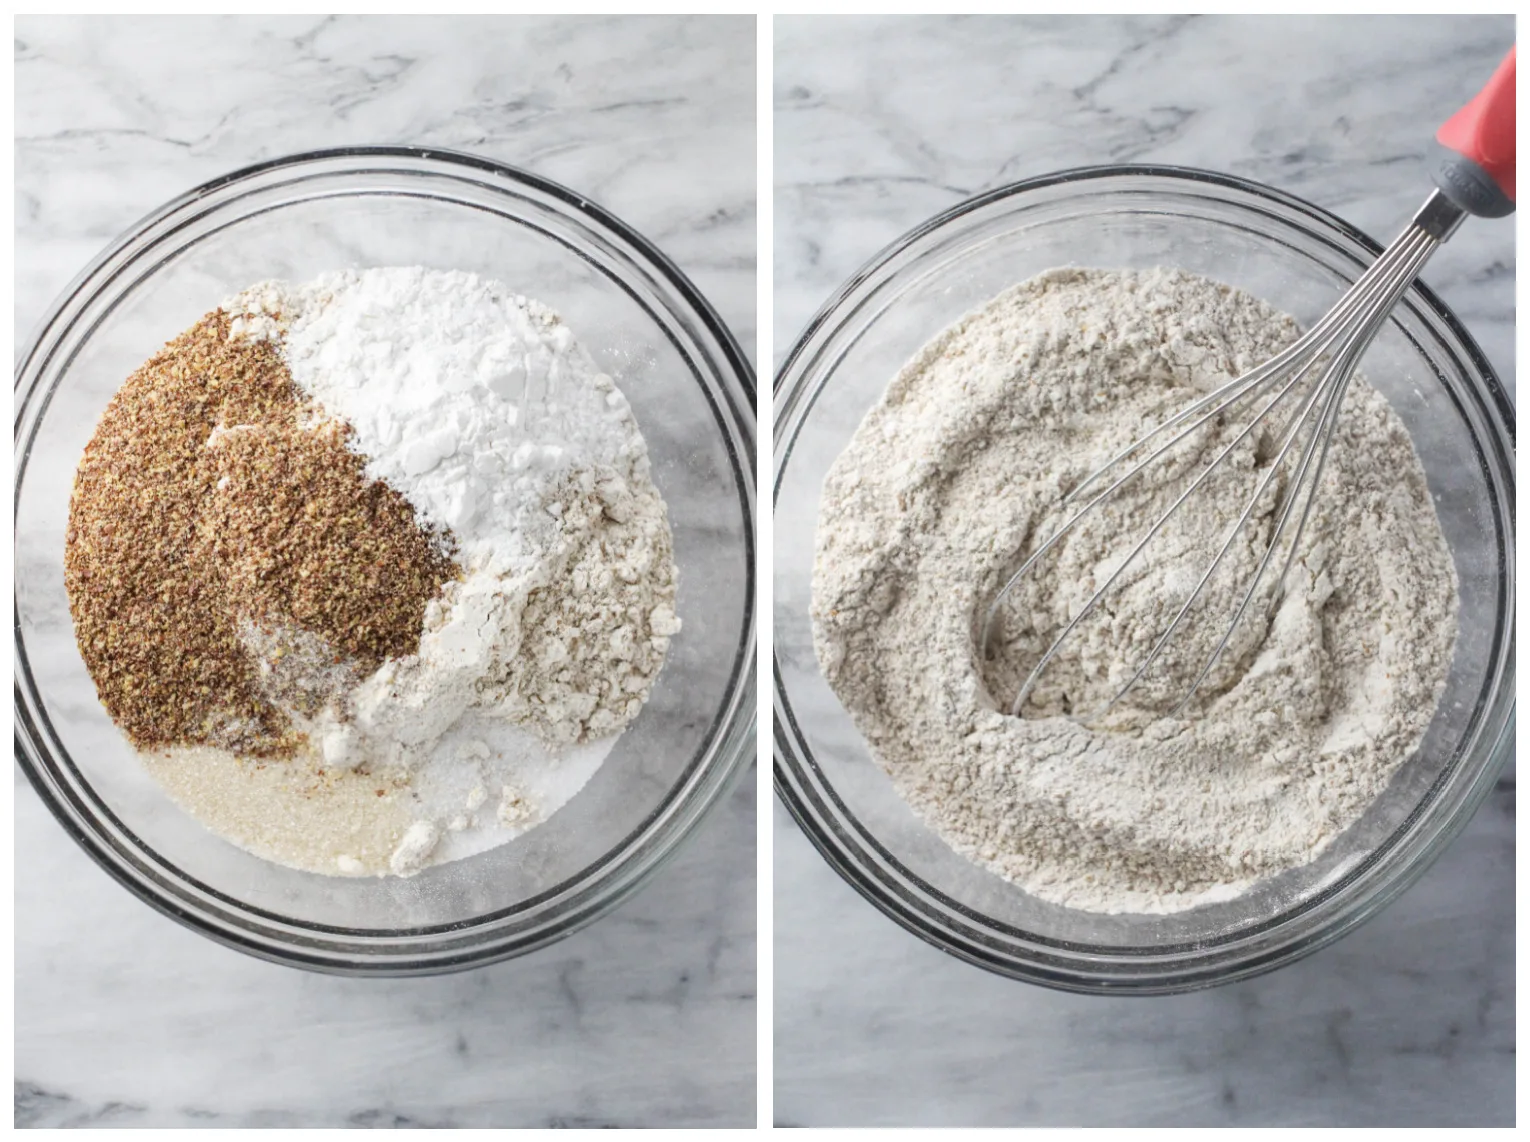 Two side by side pictures of the dry ingredients in a glass bowl. In the picture on the right, the ingredients are mixed with a whisk.